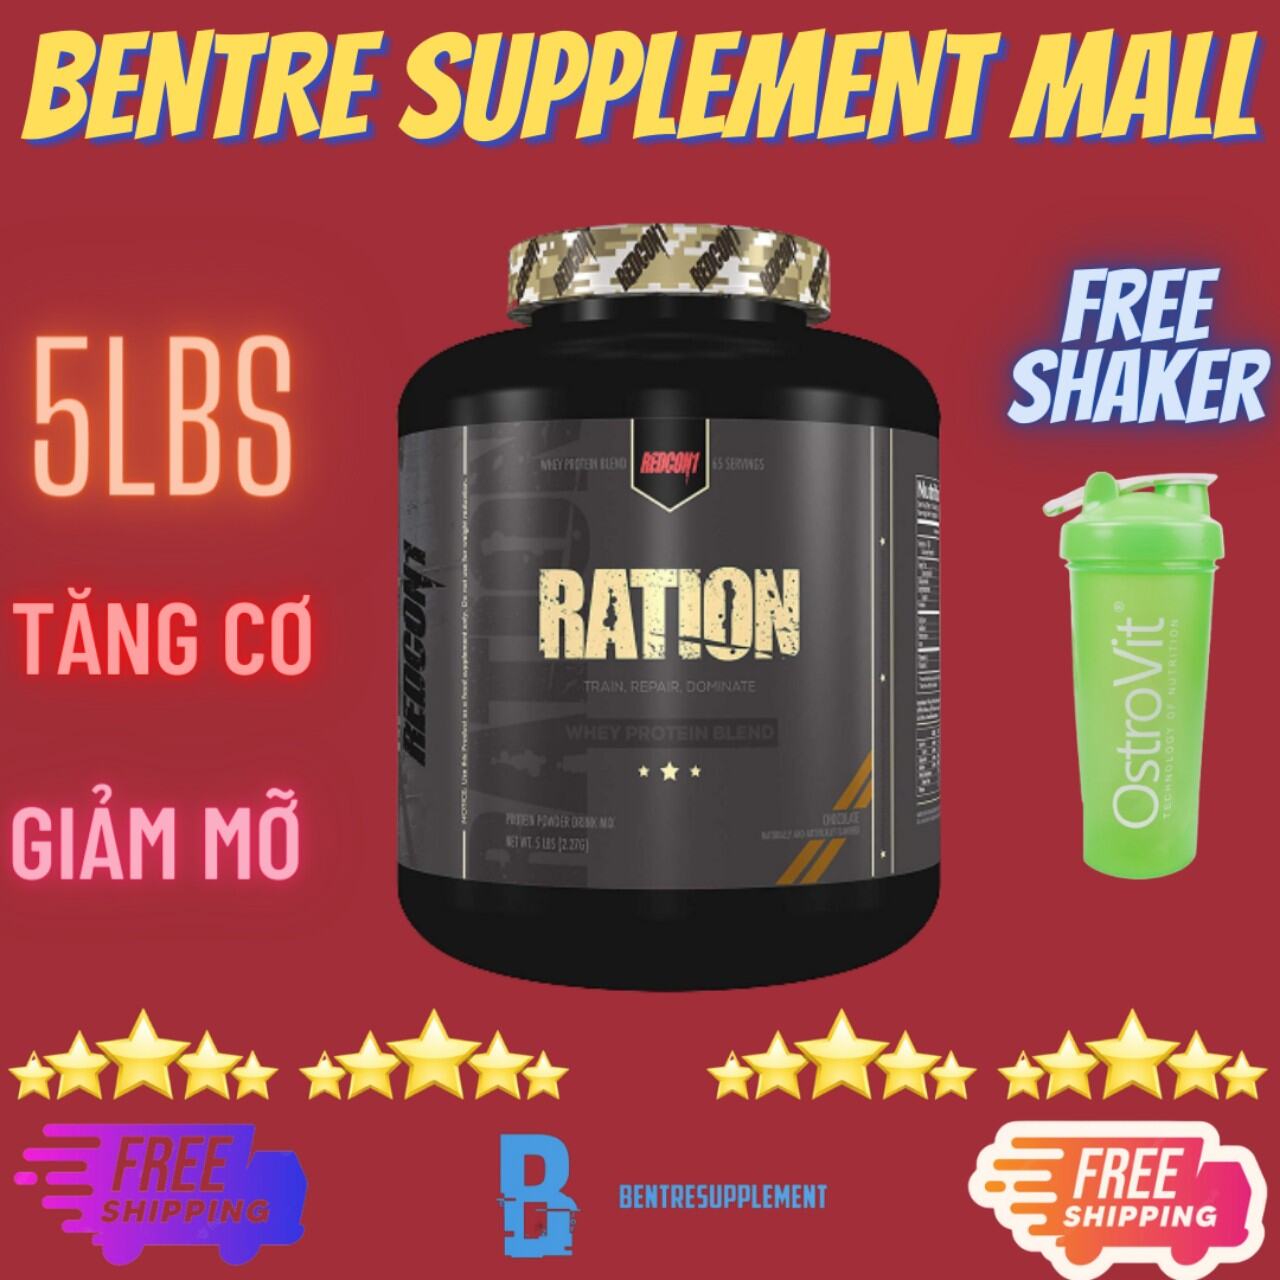 REDCON1 RATION WHEY PROTEIN HYDROLYZED CONCENTRATE TĂNG CƠ ĐẲNG CẤP 2KG